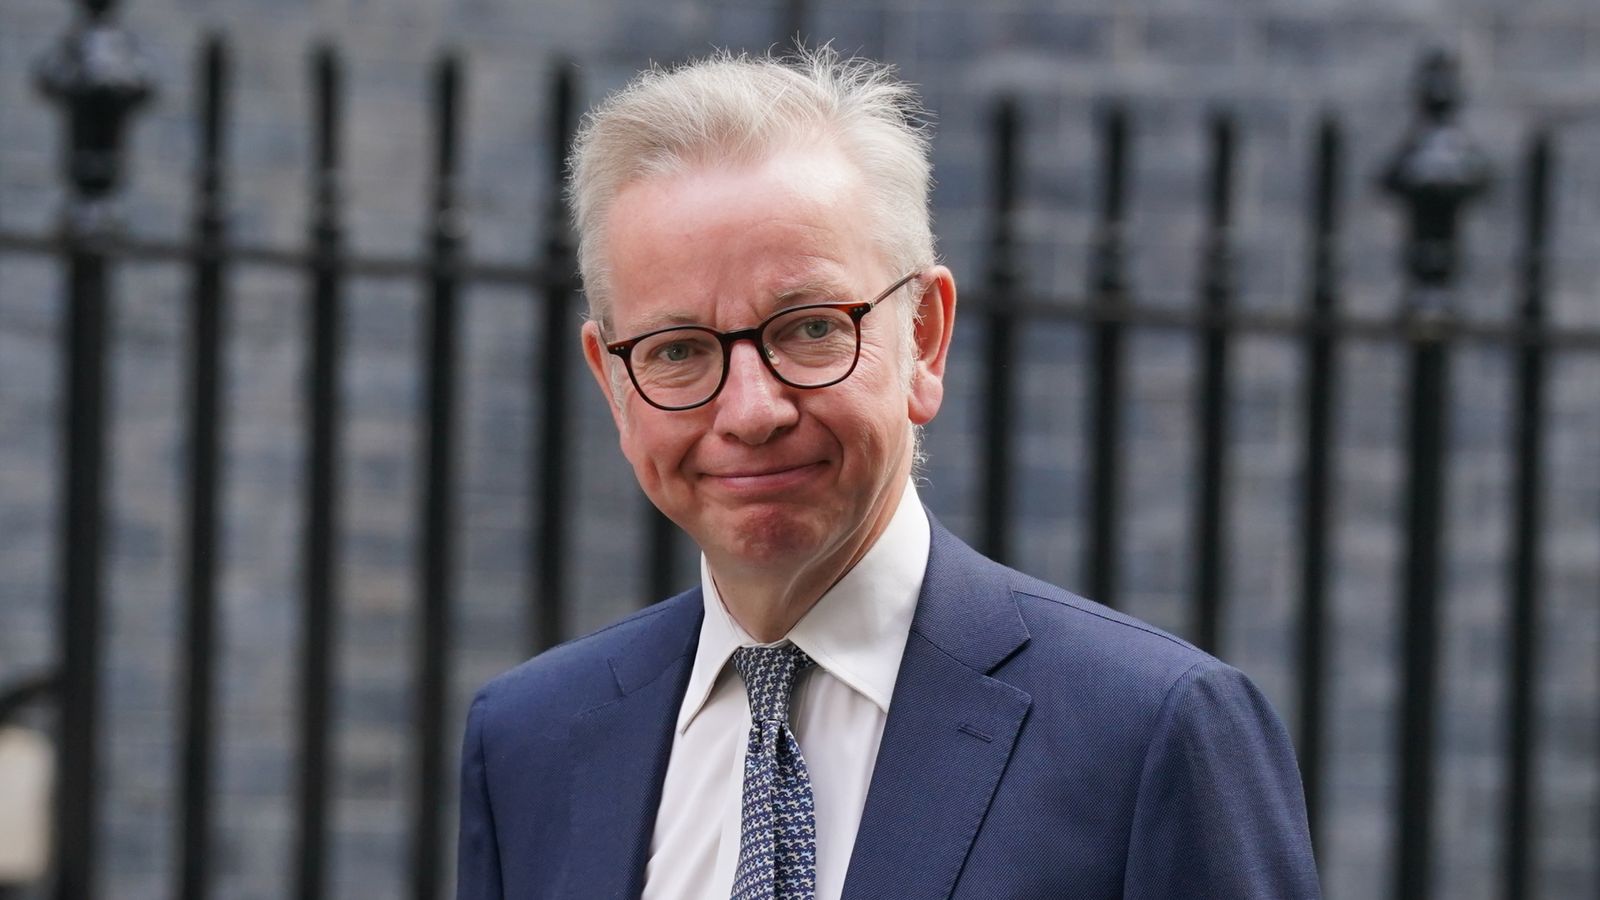 Michael Gove calls for relaxation of net zero measures and warns against treating environment as 'religious crusade'